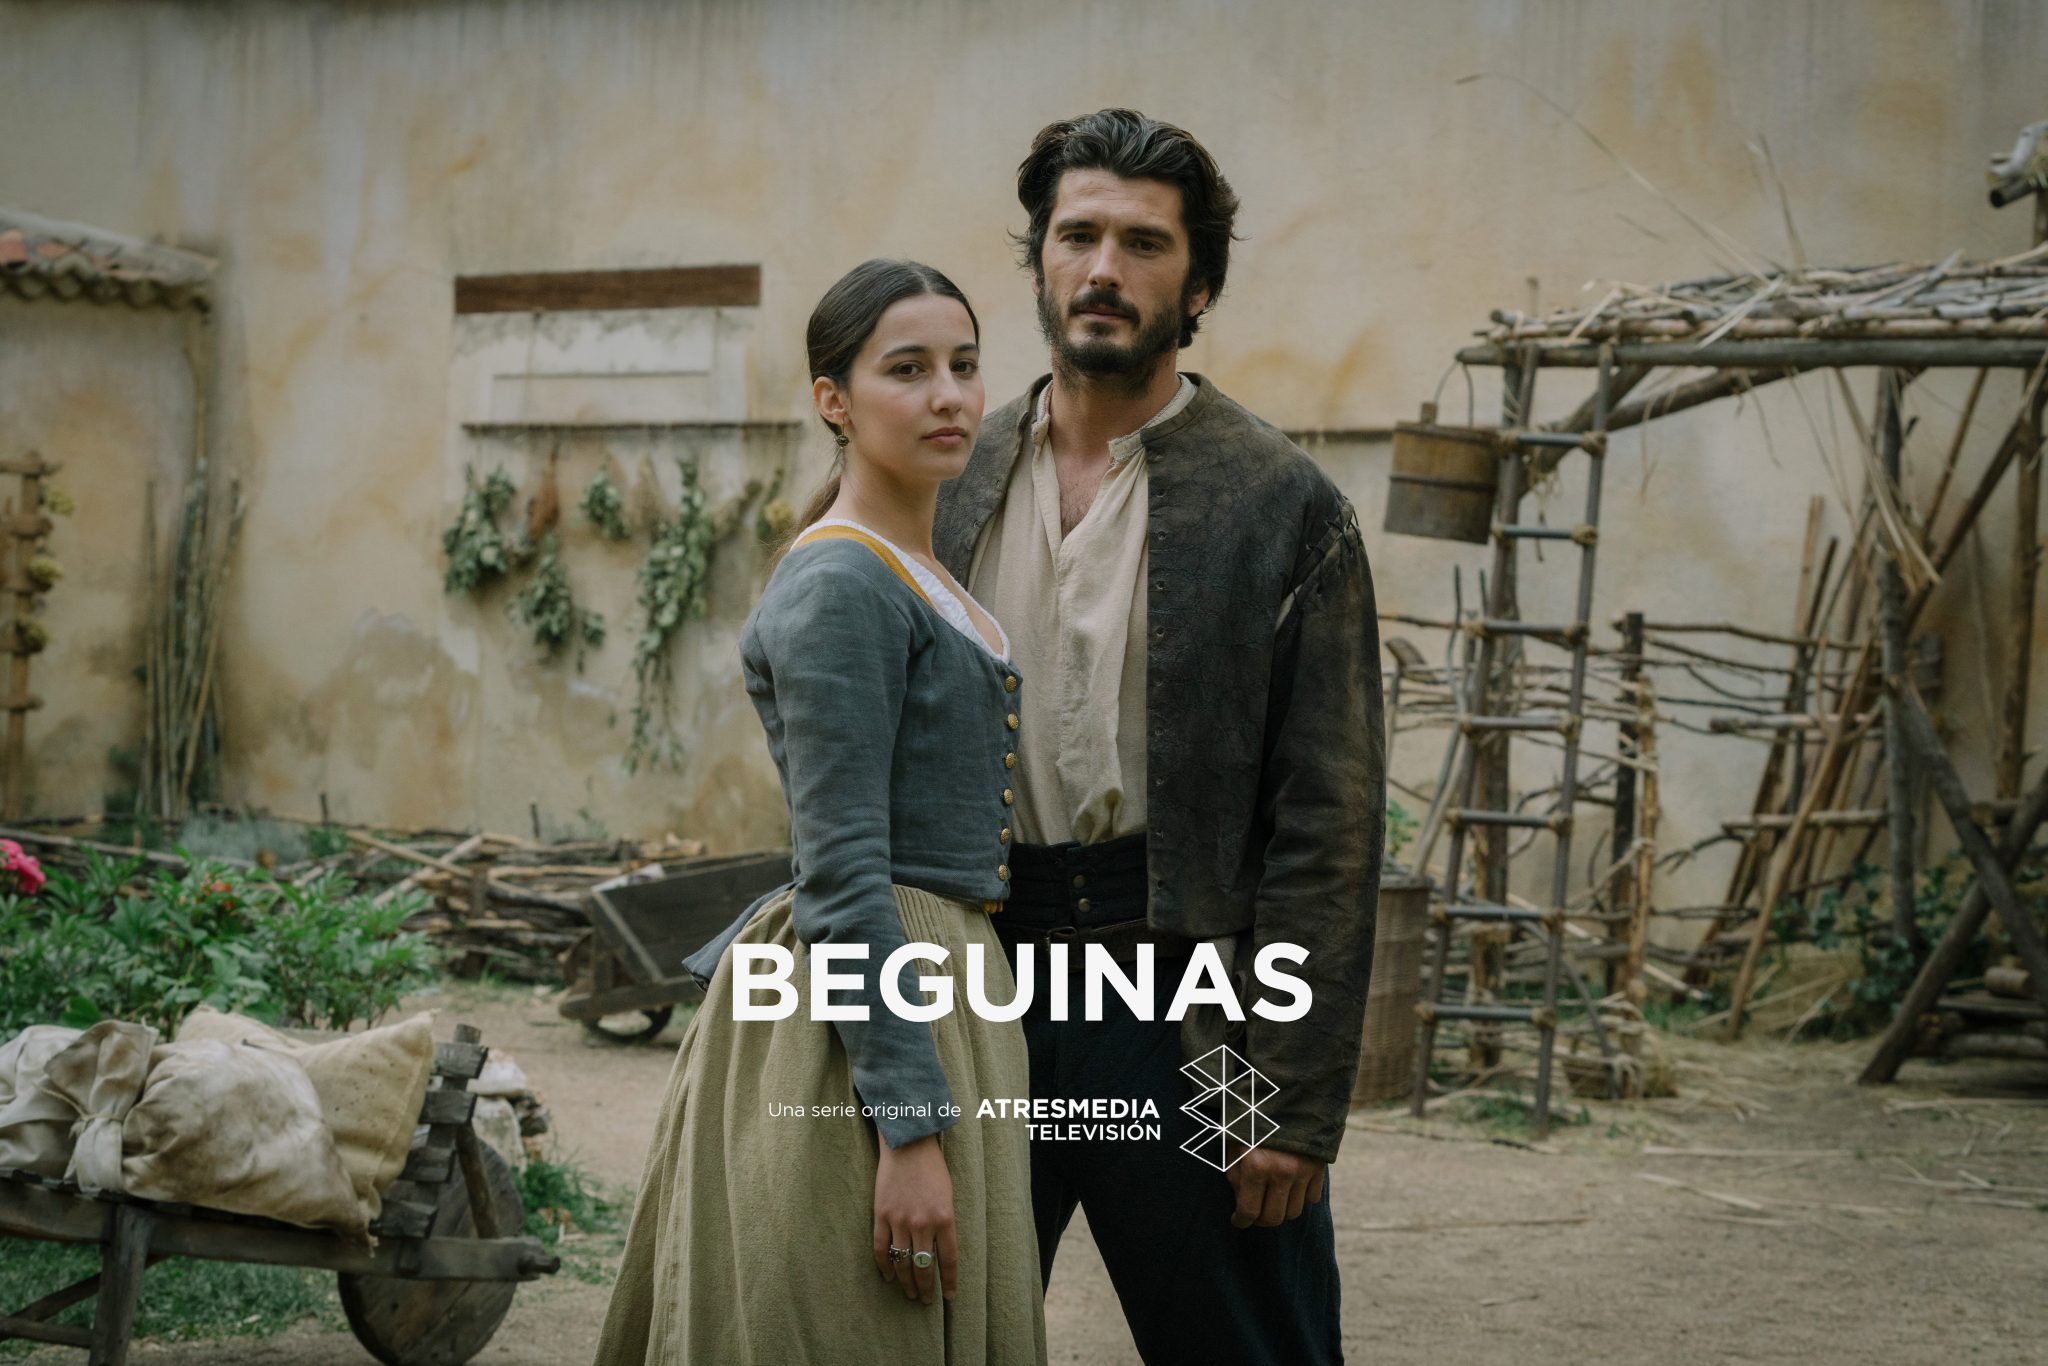 ‘Beguinas’, produced by Buendía Estudios, completes the cast and starts filming